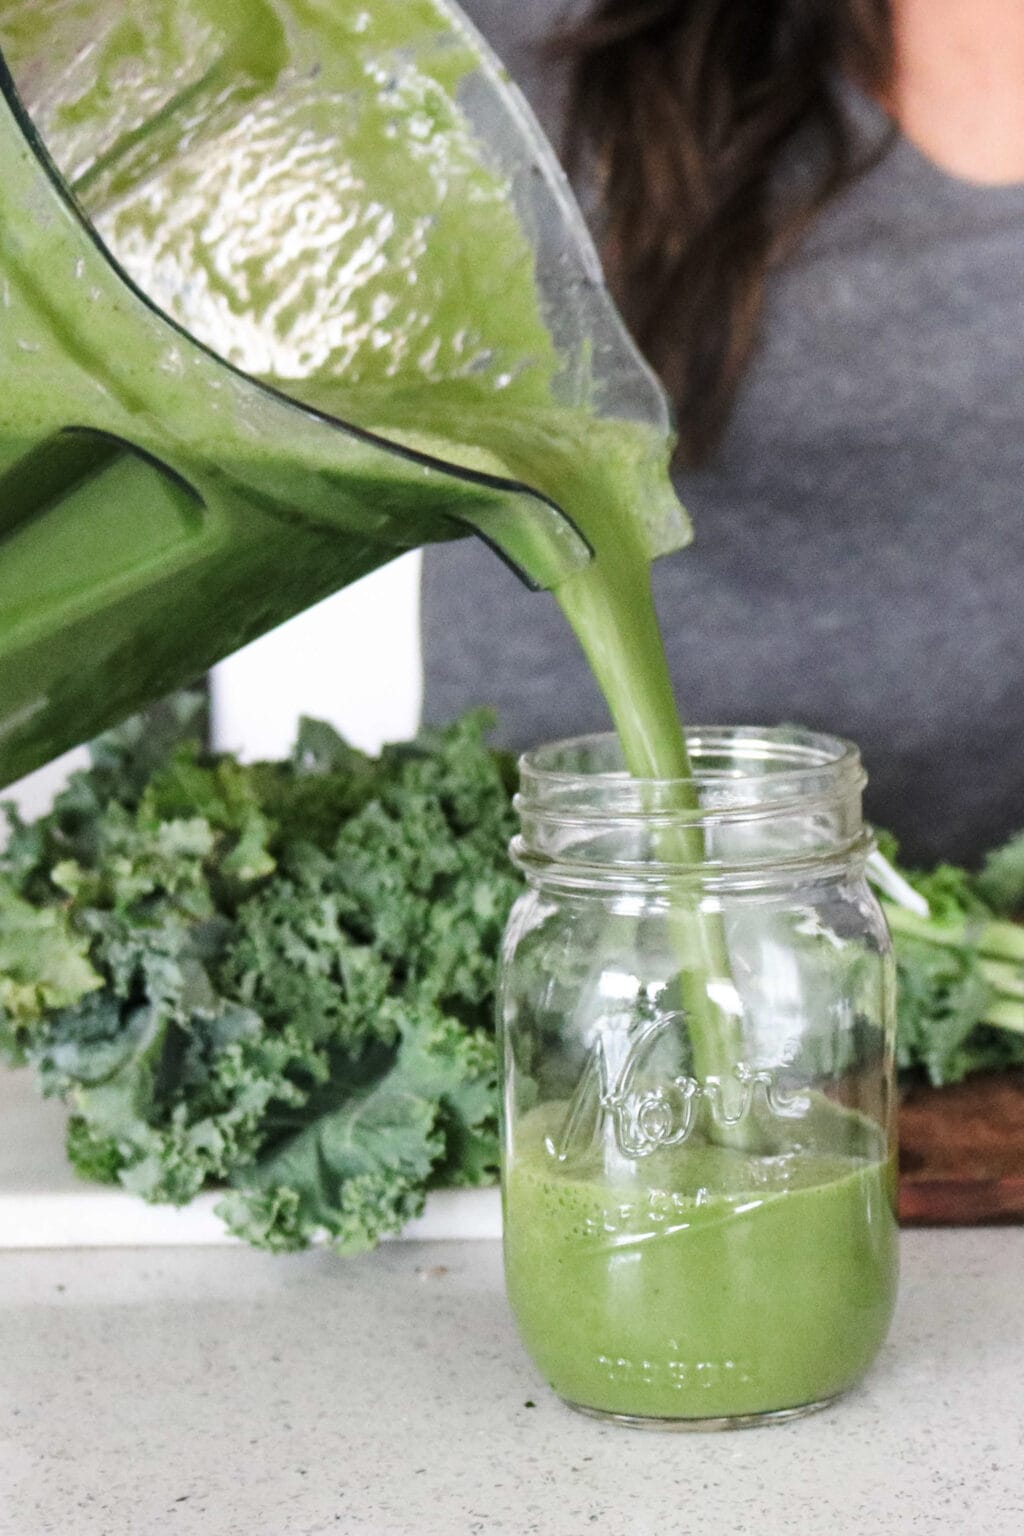 How to make a Vegetable Smoothie using a Vitamix Blender